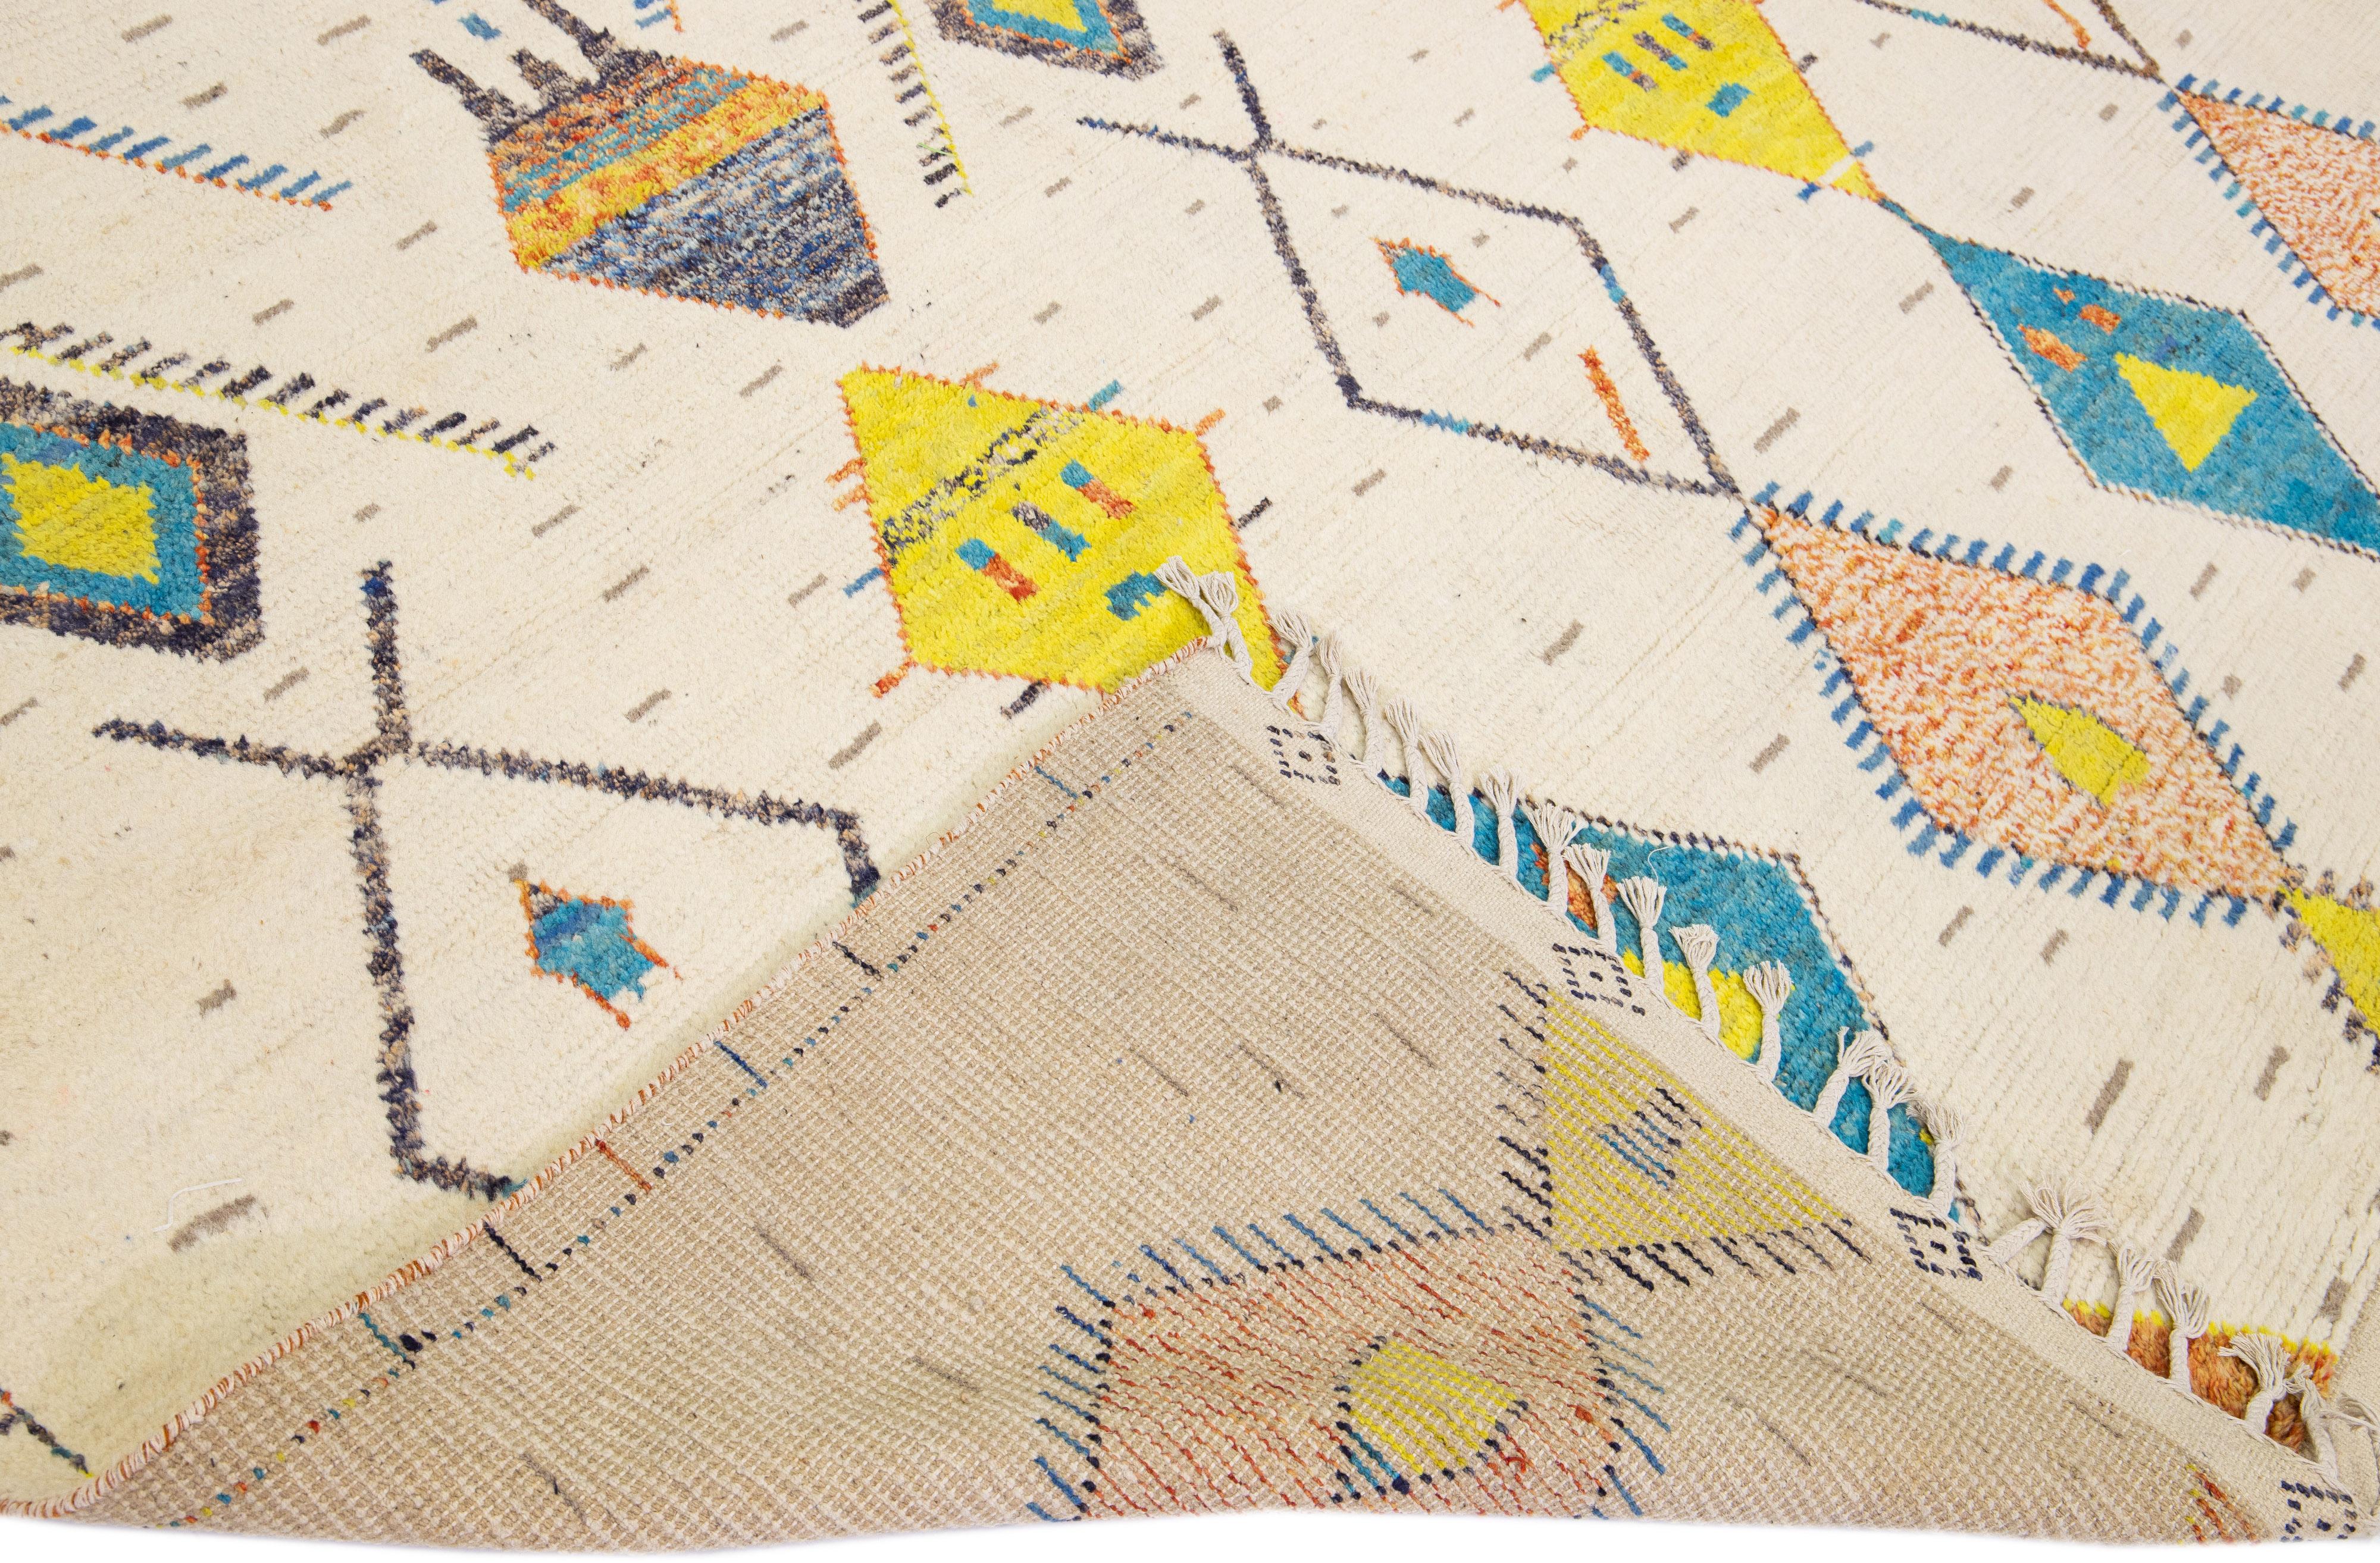 Beautiful modern Moroccan style hand-knotted wool rug with a beige field and fringes on the top and bottom end. This piece has orange, blue, gray, and yellow accent colors in a gorgeous tribal design.

This rug measures: 10' x 14'6